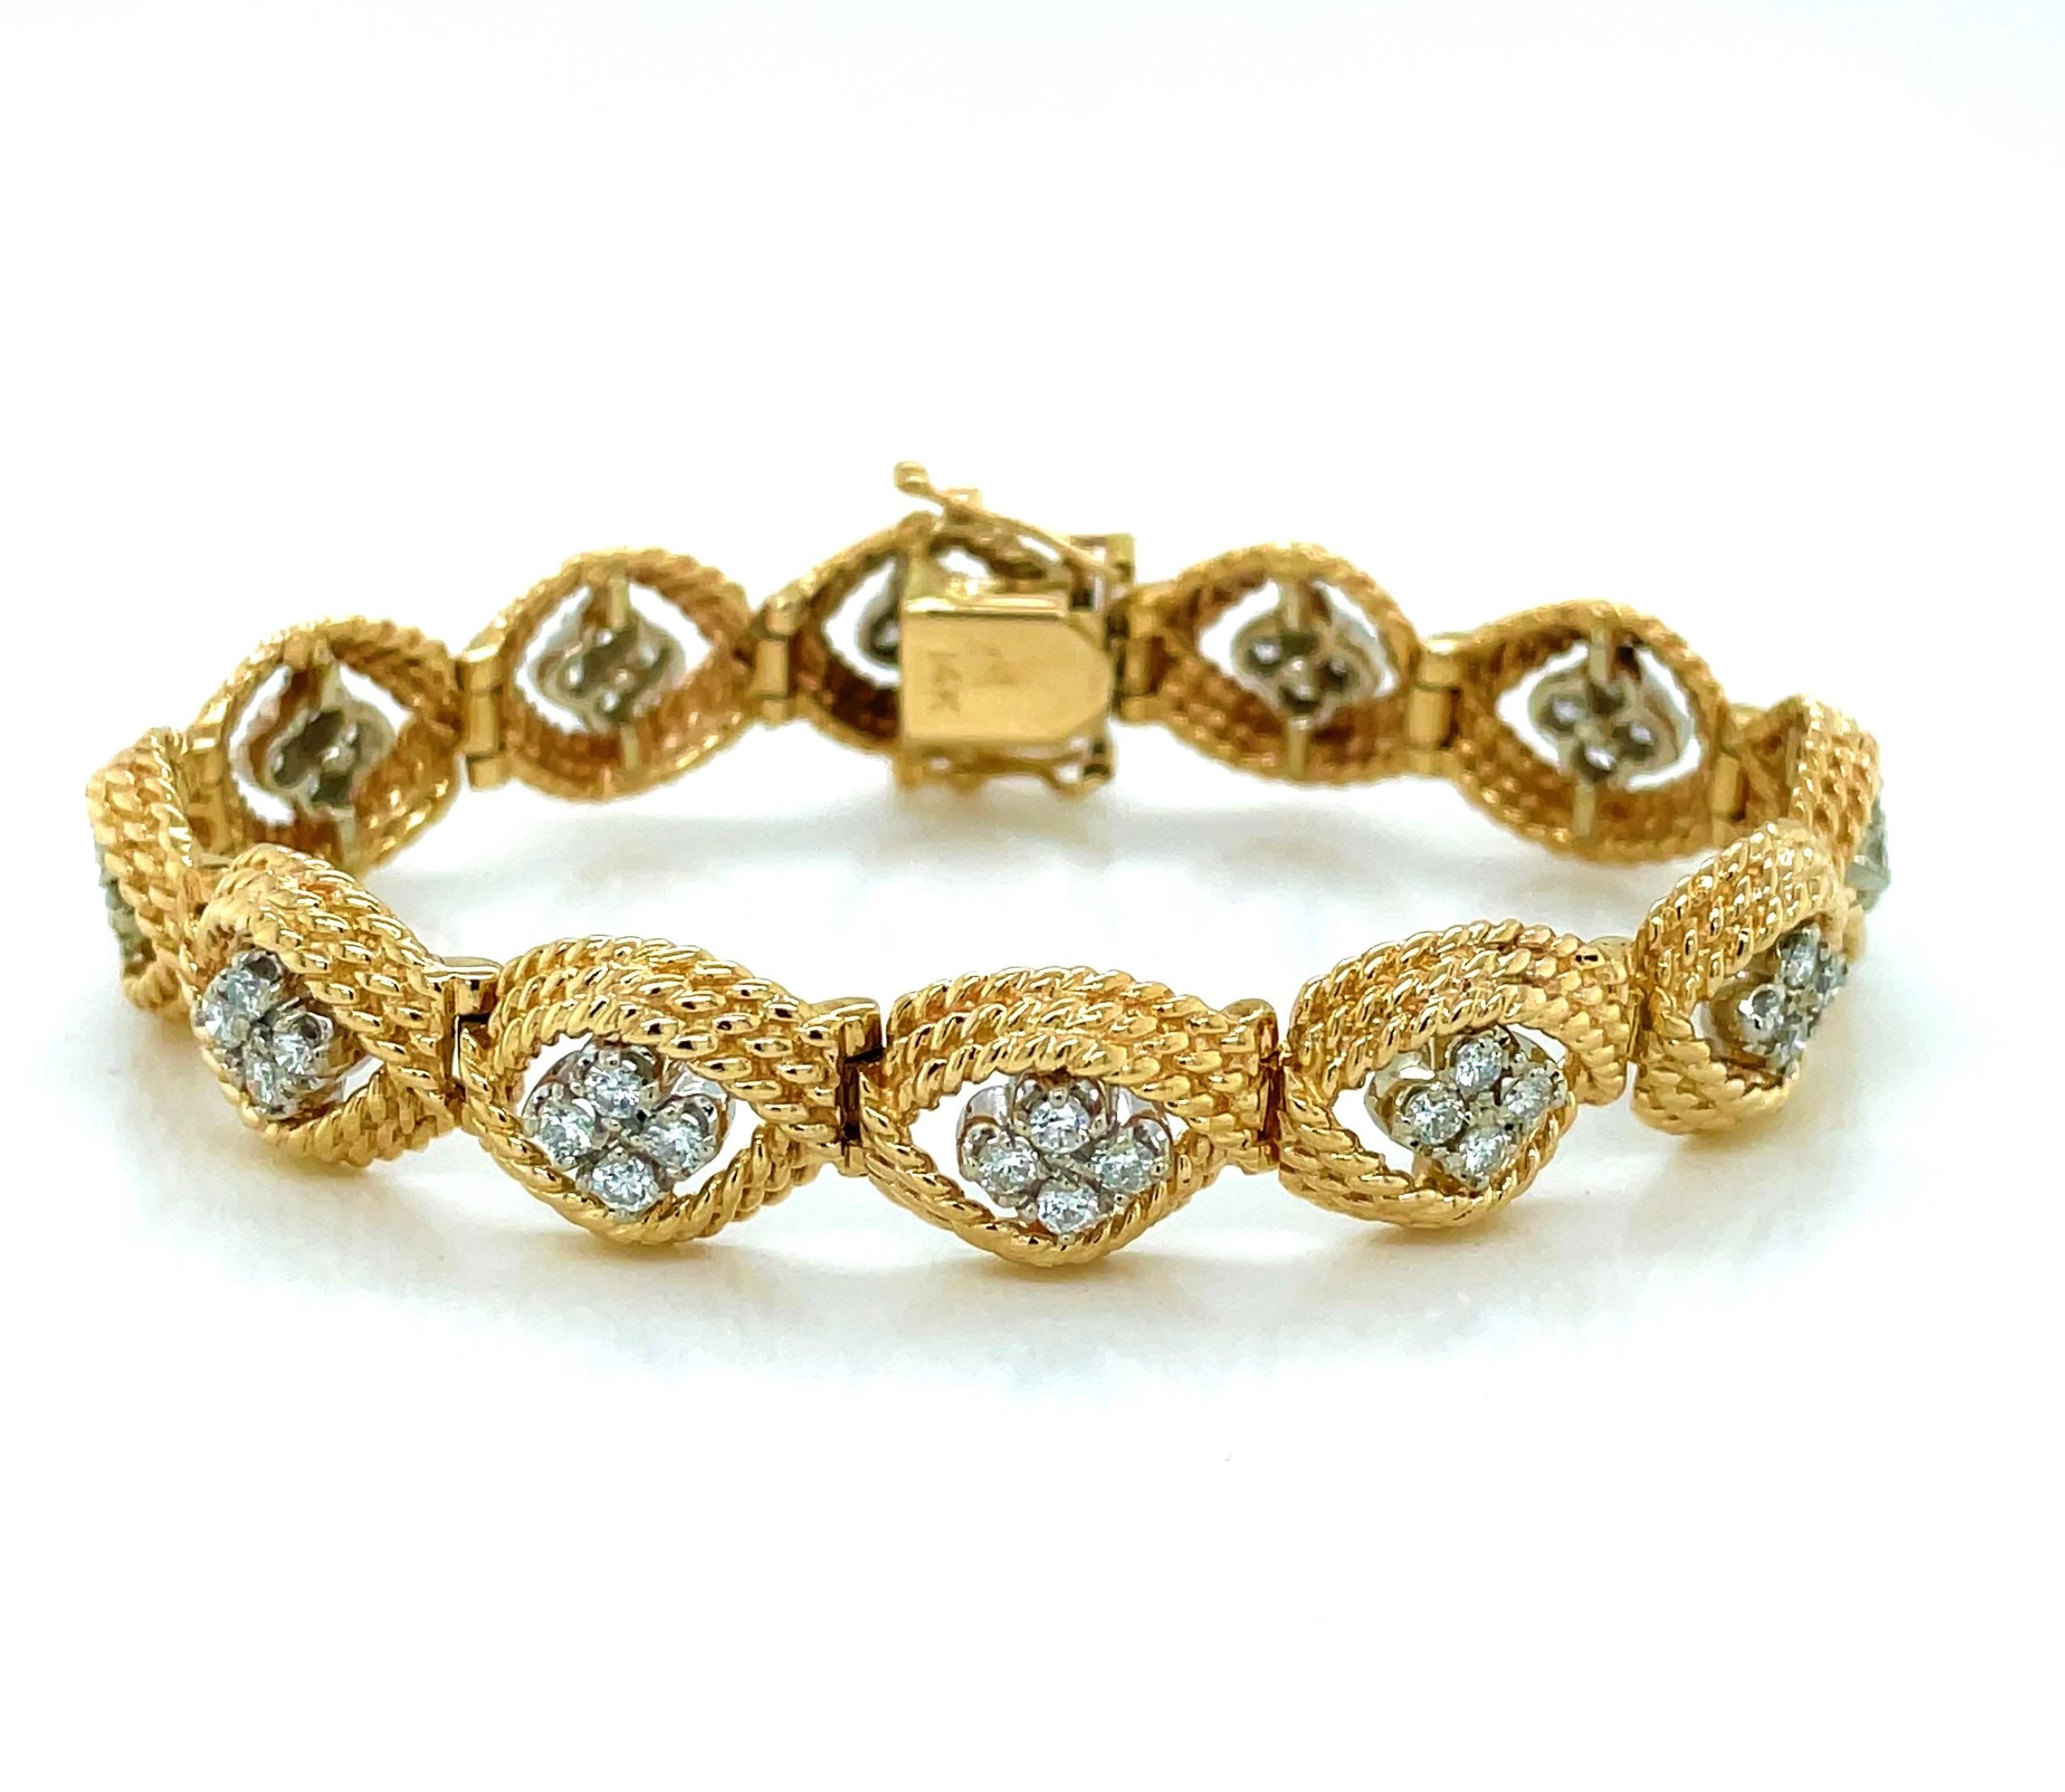 A total of 2.4 carats of H/VS diamonds light up the length of this elegant 14 karat yellow gold dress bracelet. Presented in quads, twelve clusters of .05 carat diamond gemstones float centered amid uniquely crafted oval shaped twists of gold that